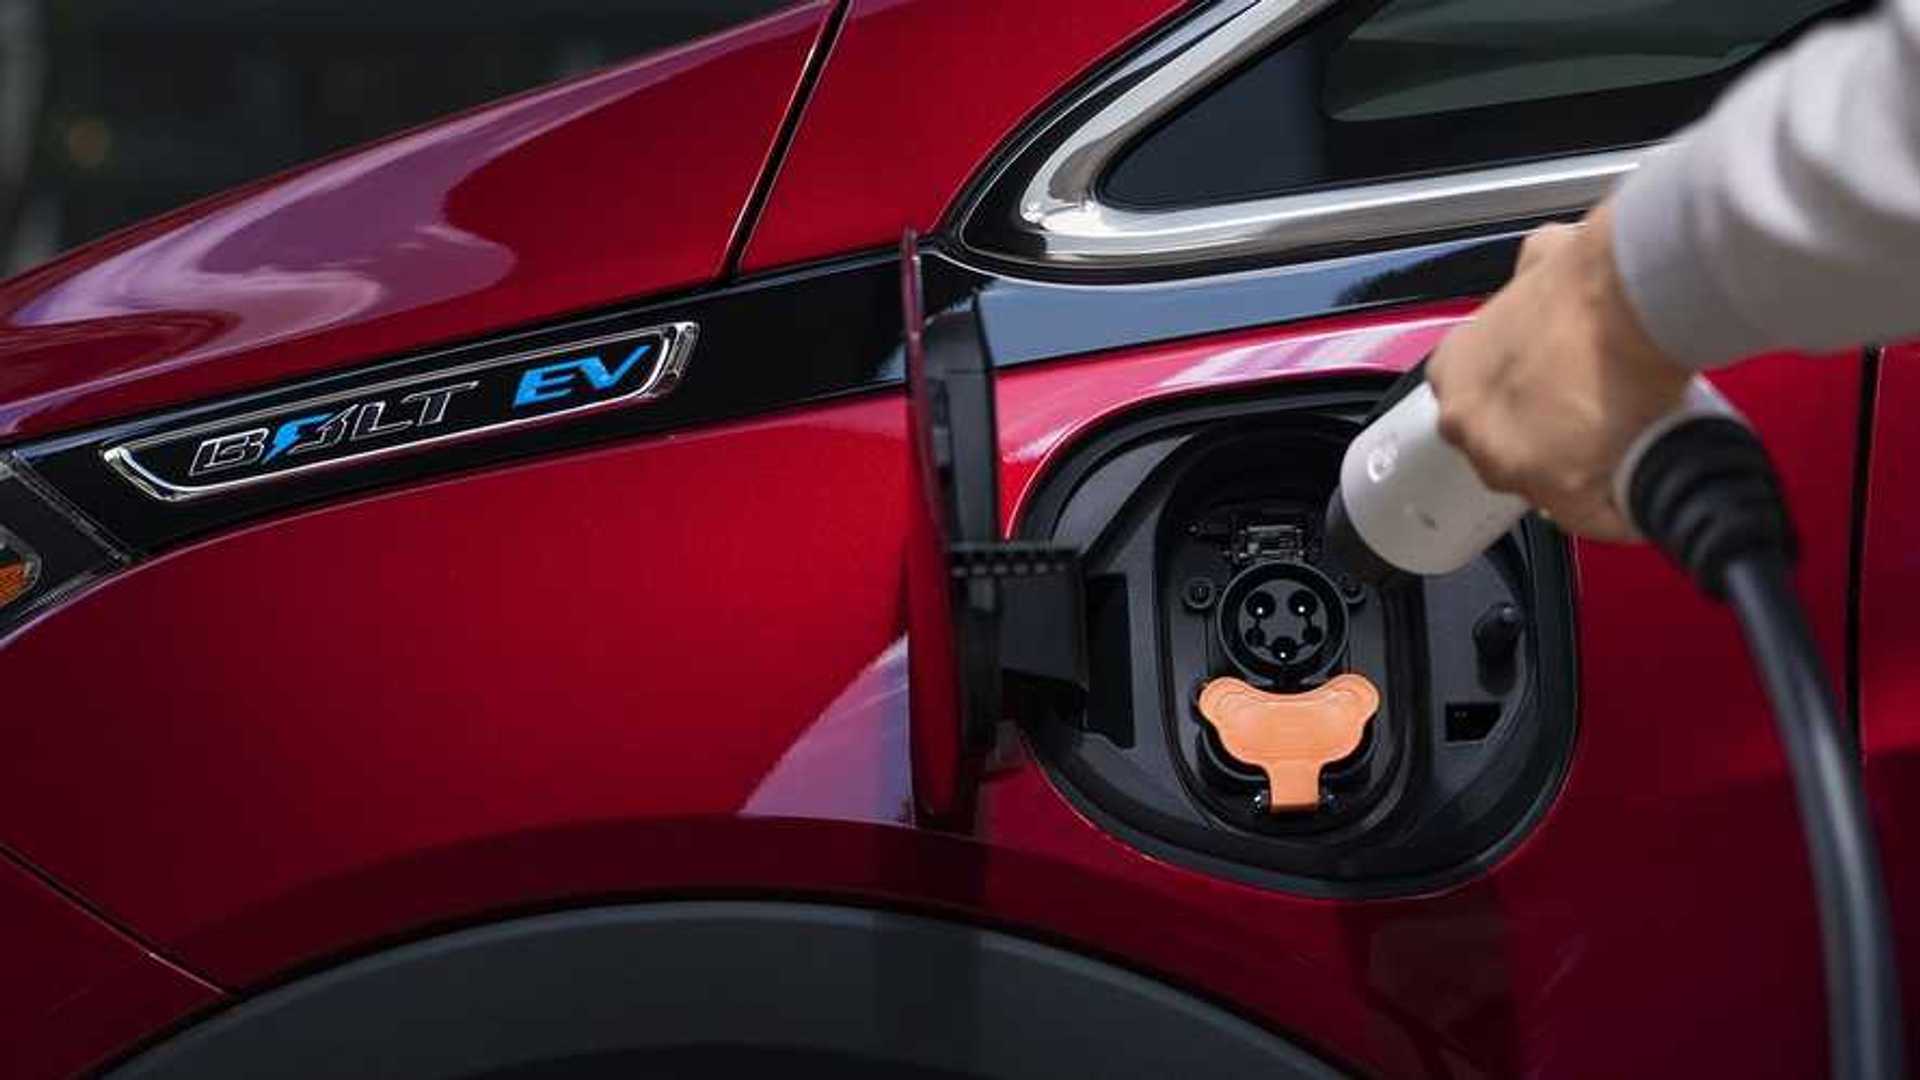 owner ditches gas hyundai kona for used chevy bolt ev, ends up with money in her pocket